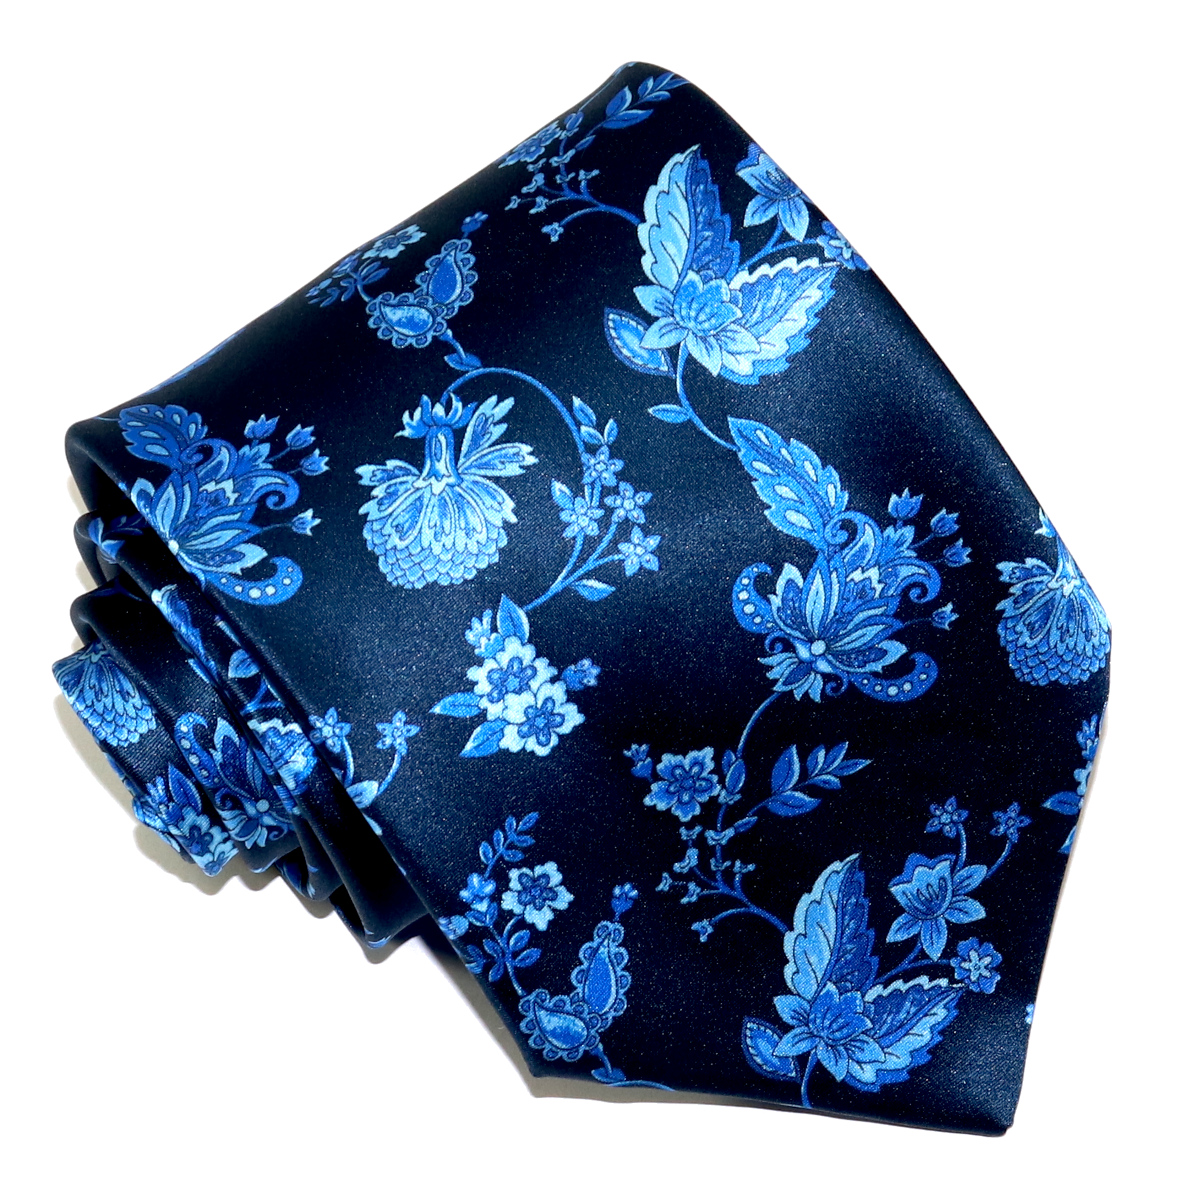 Tie and Pocket Square Set Silver and Navy Blue Patterned Handmade 100% Silk 